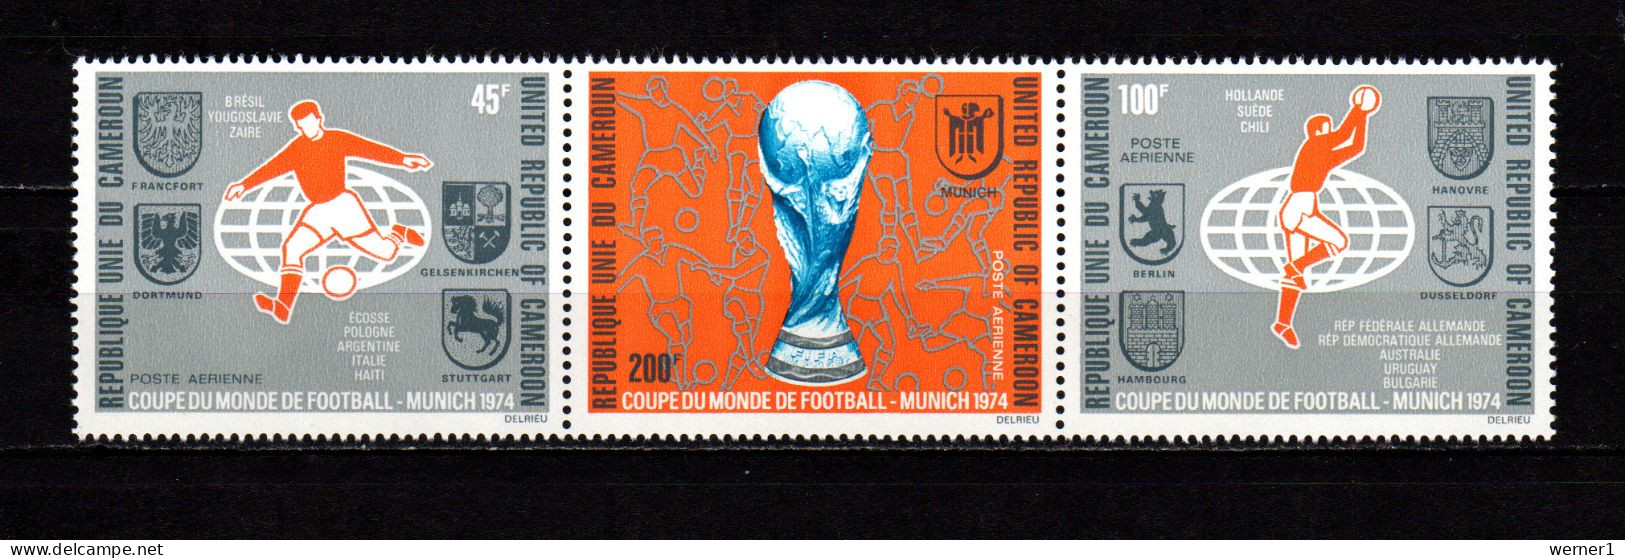 Cameroon - Cameroun 1974 Football Soccer World Cup Strip Of 3 MNH - 1974 – Germania Ovest